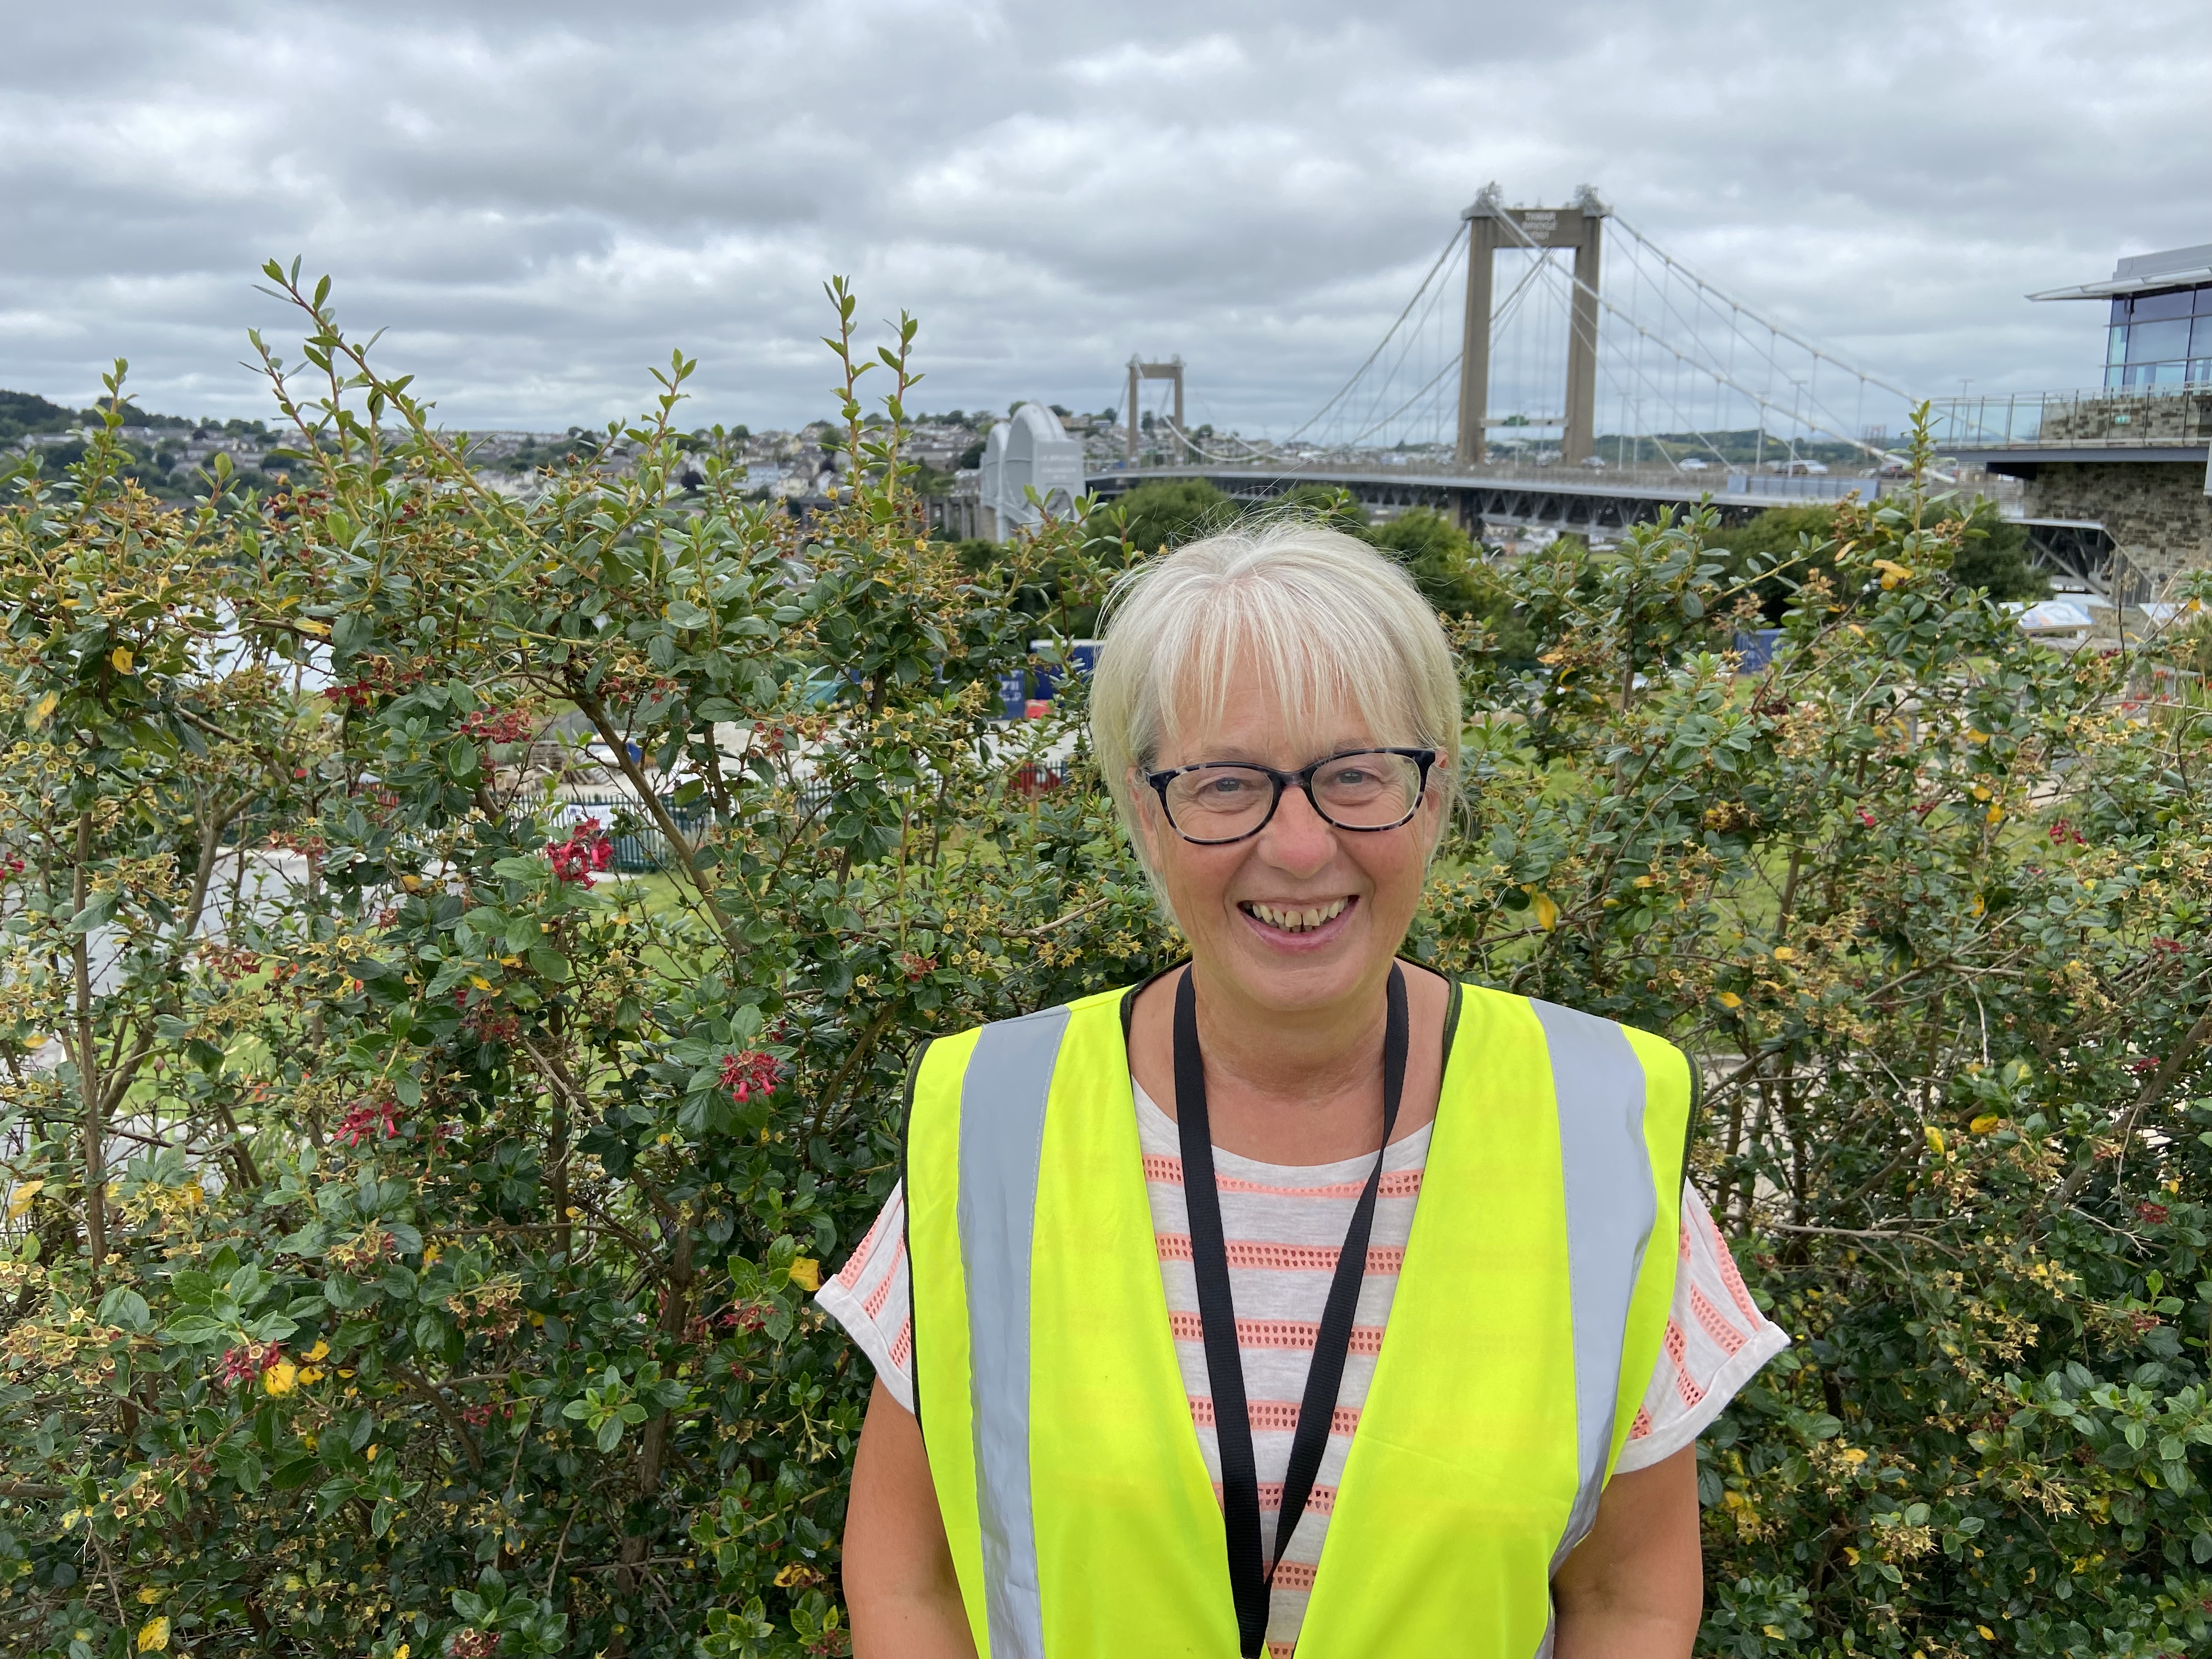 Lady in high vis jacket standing outside in front of greenery and bridges.